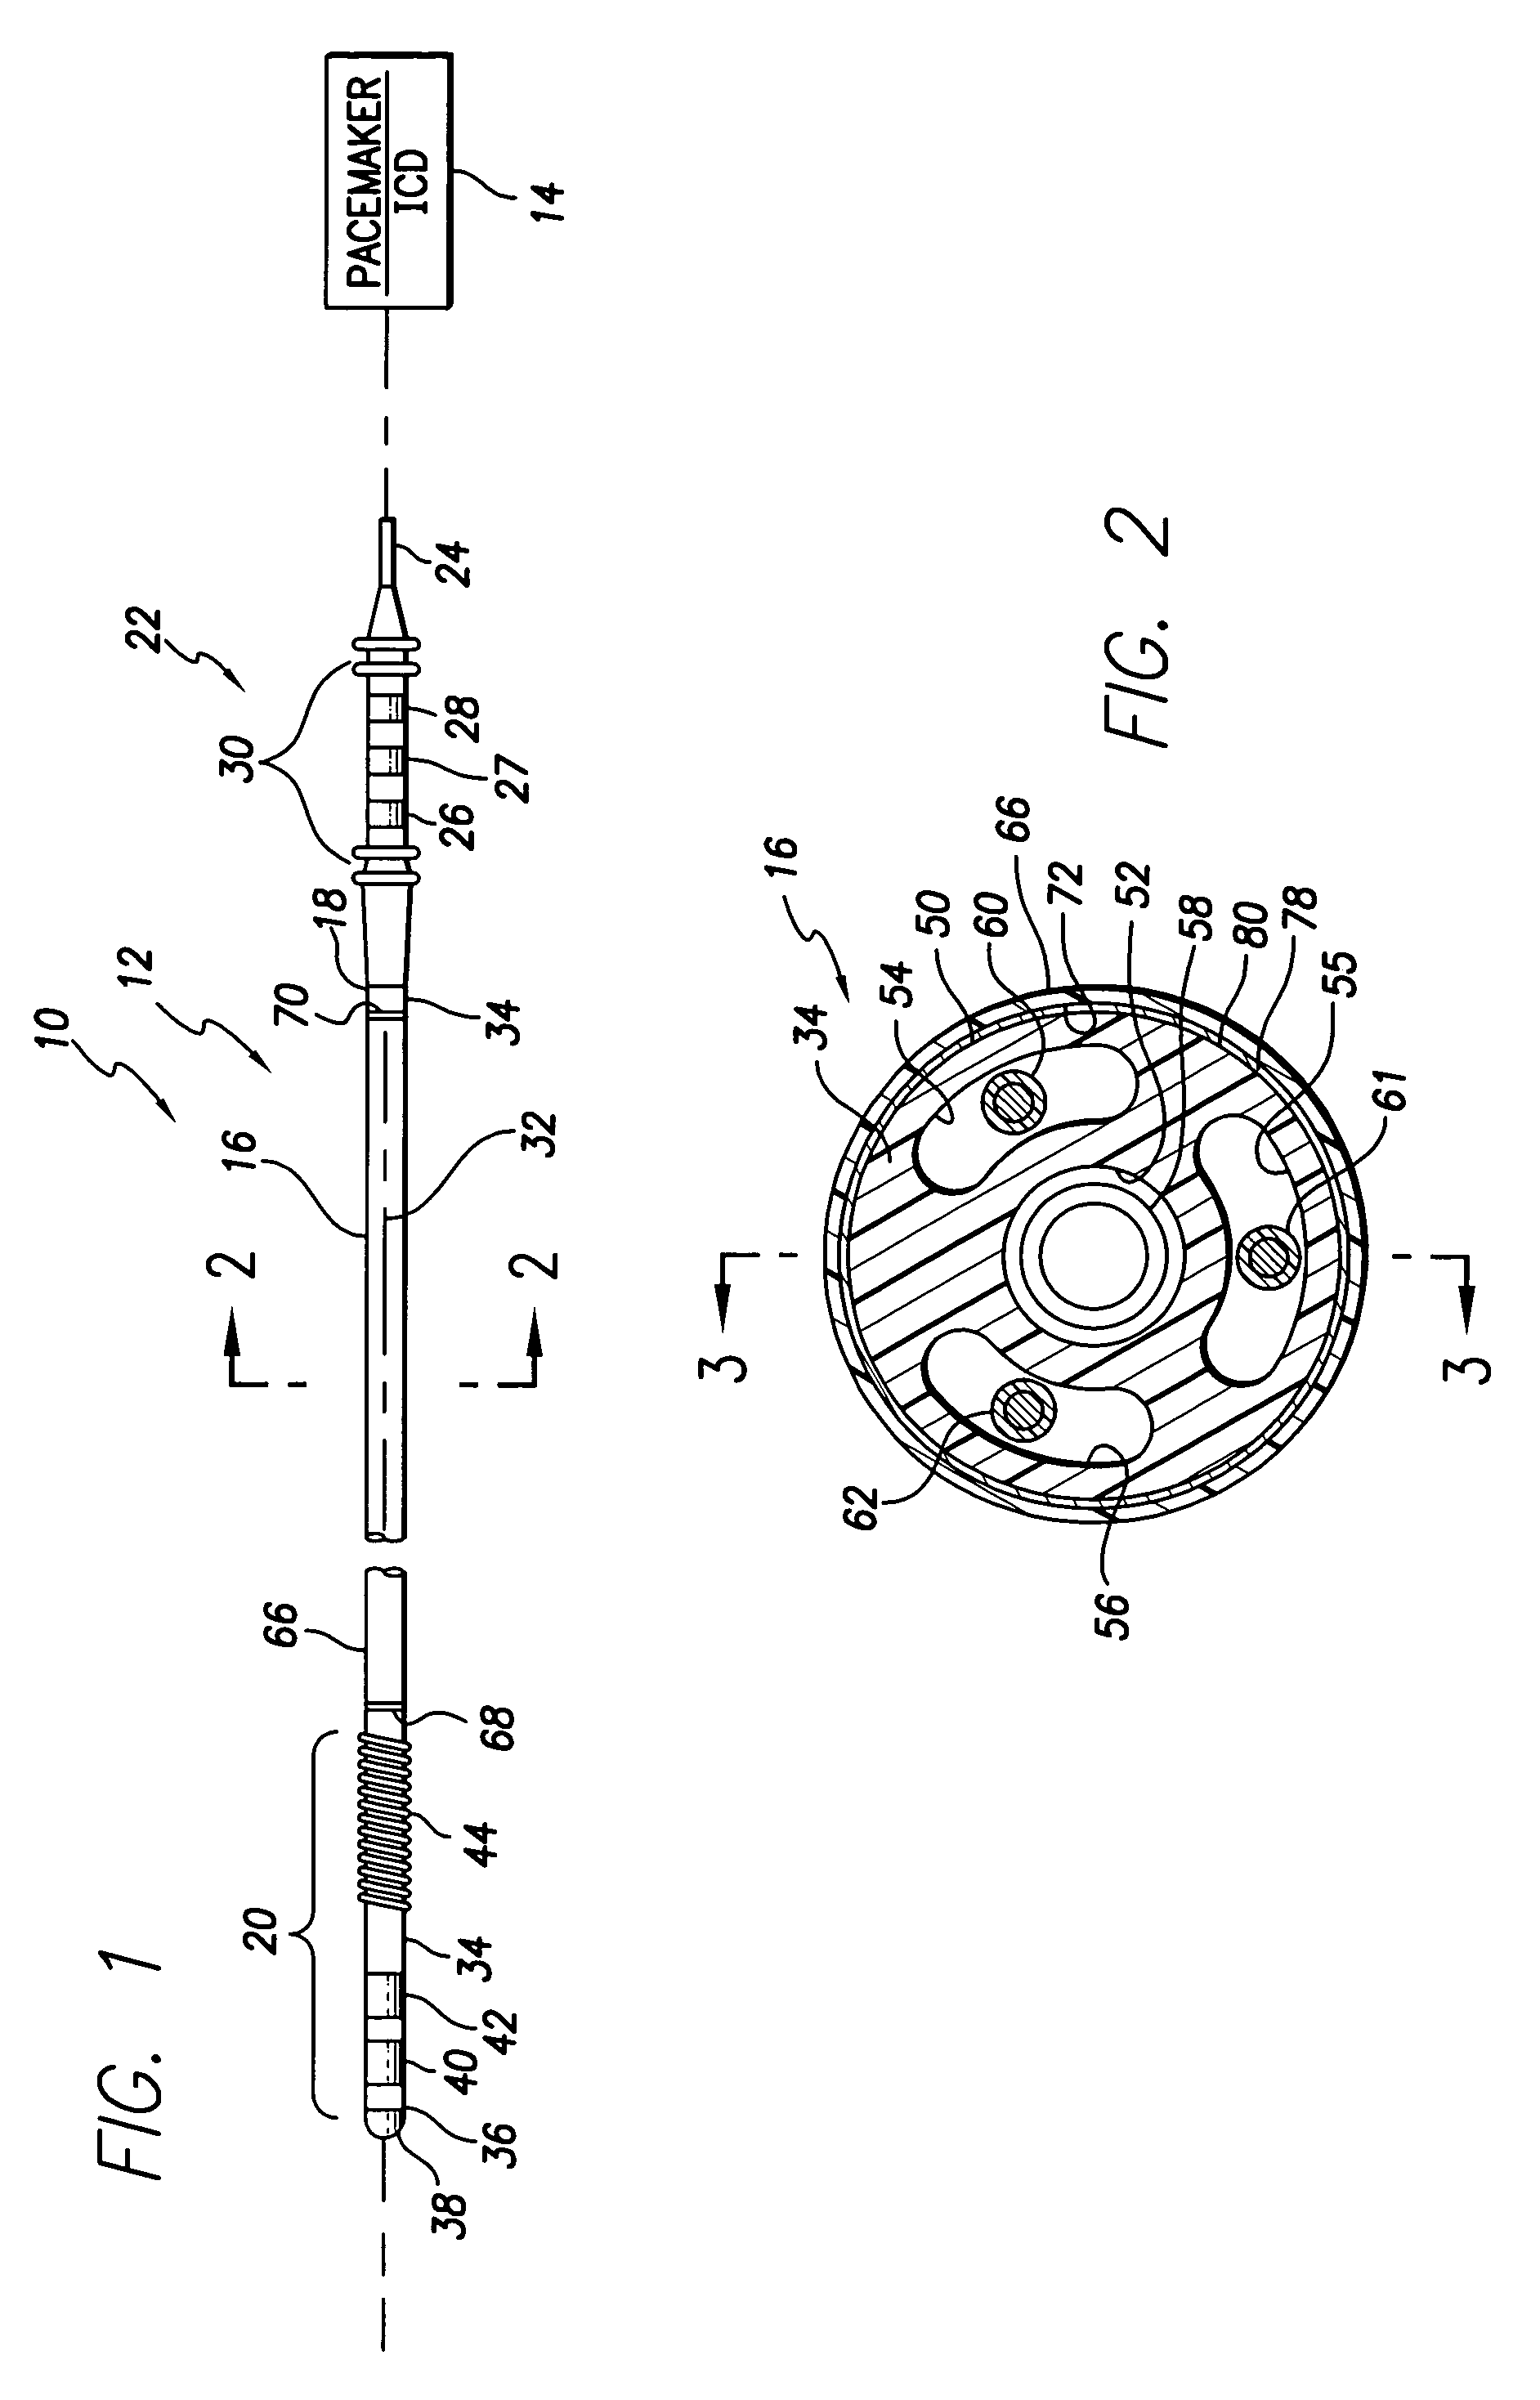 Abrasion-resistant implantable medical lead and a method of fabricating such a lead